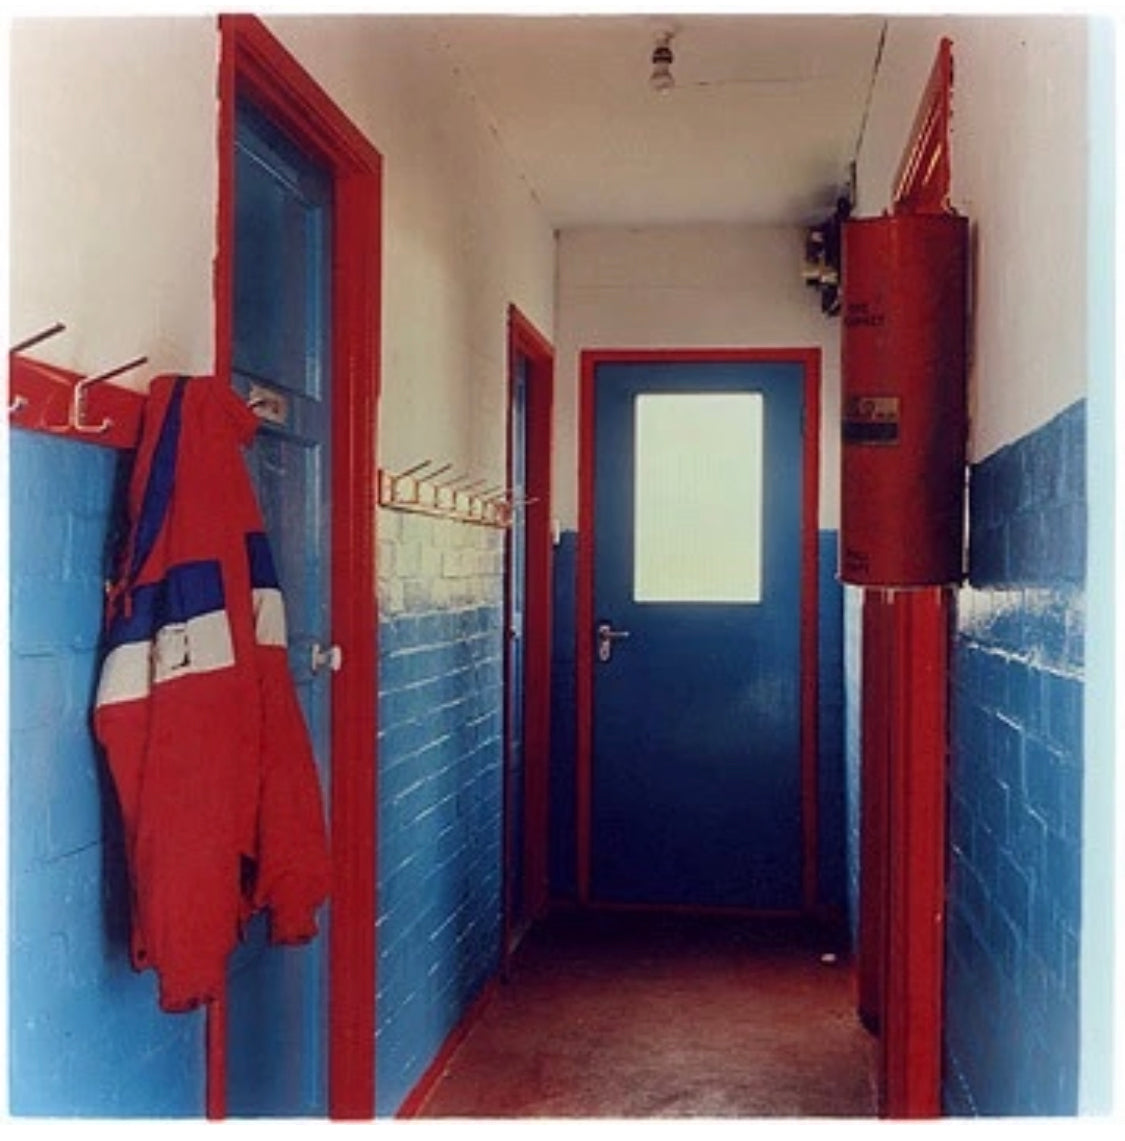 A jacket hangs from a row of coat pegs in a hallway painted blue, red and white.